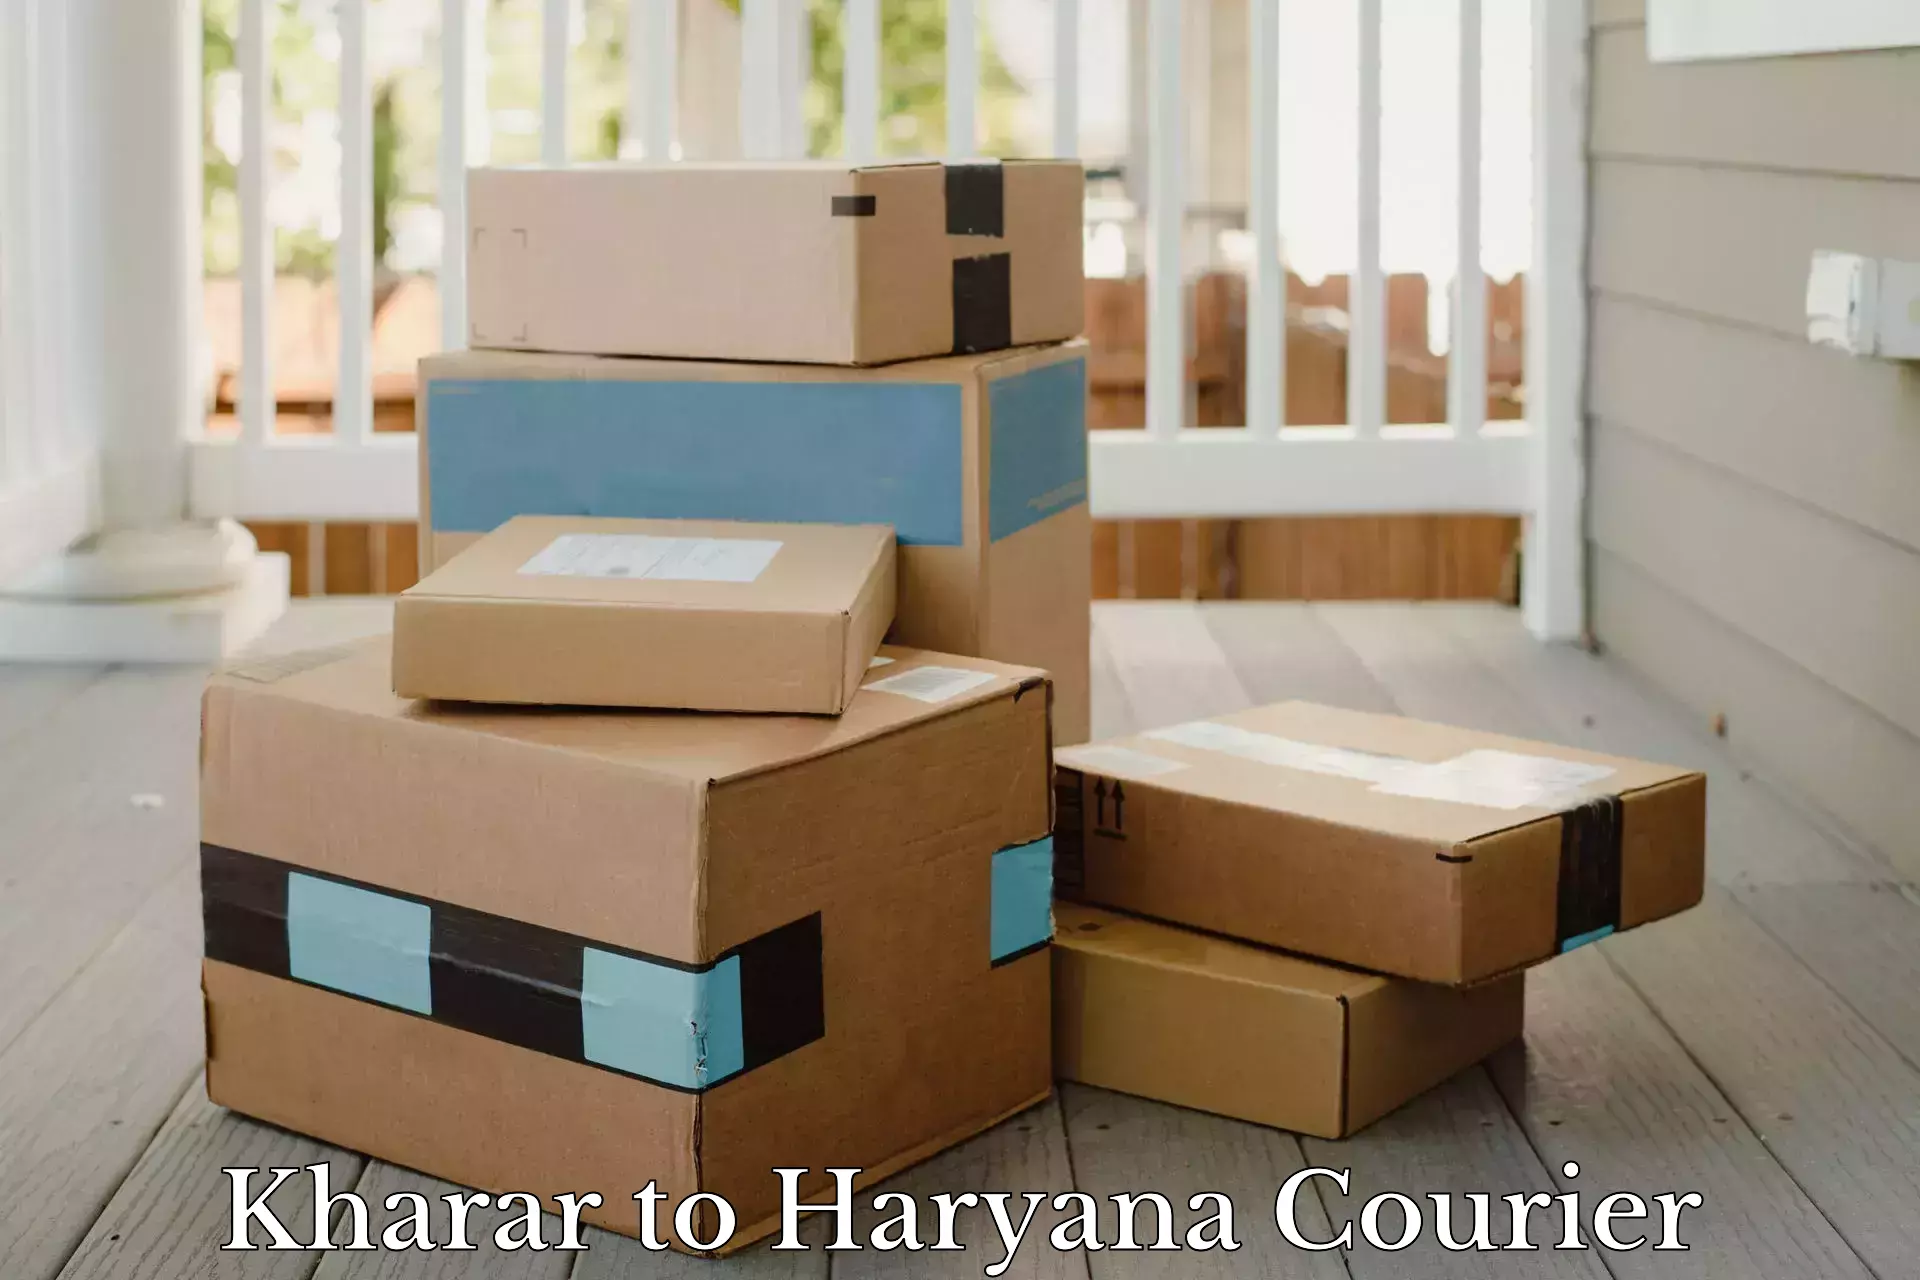 Efficient package consolidation Kharar to NCR Haryana